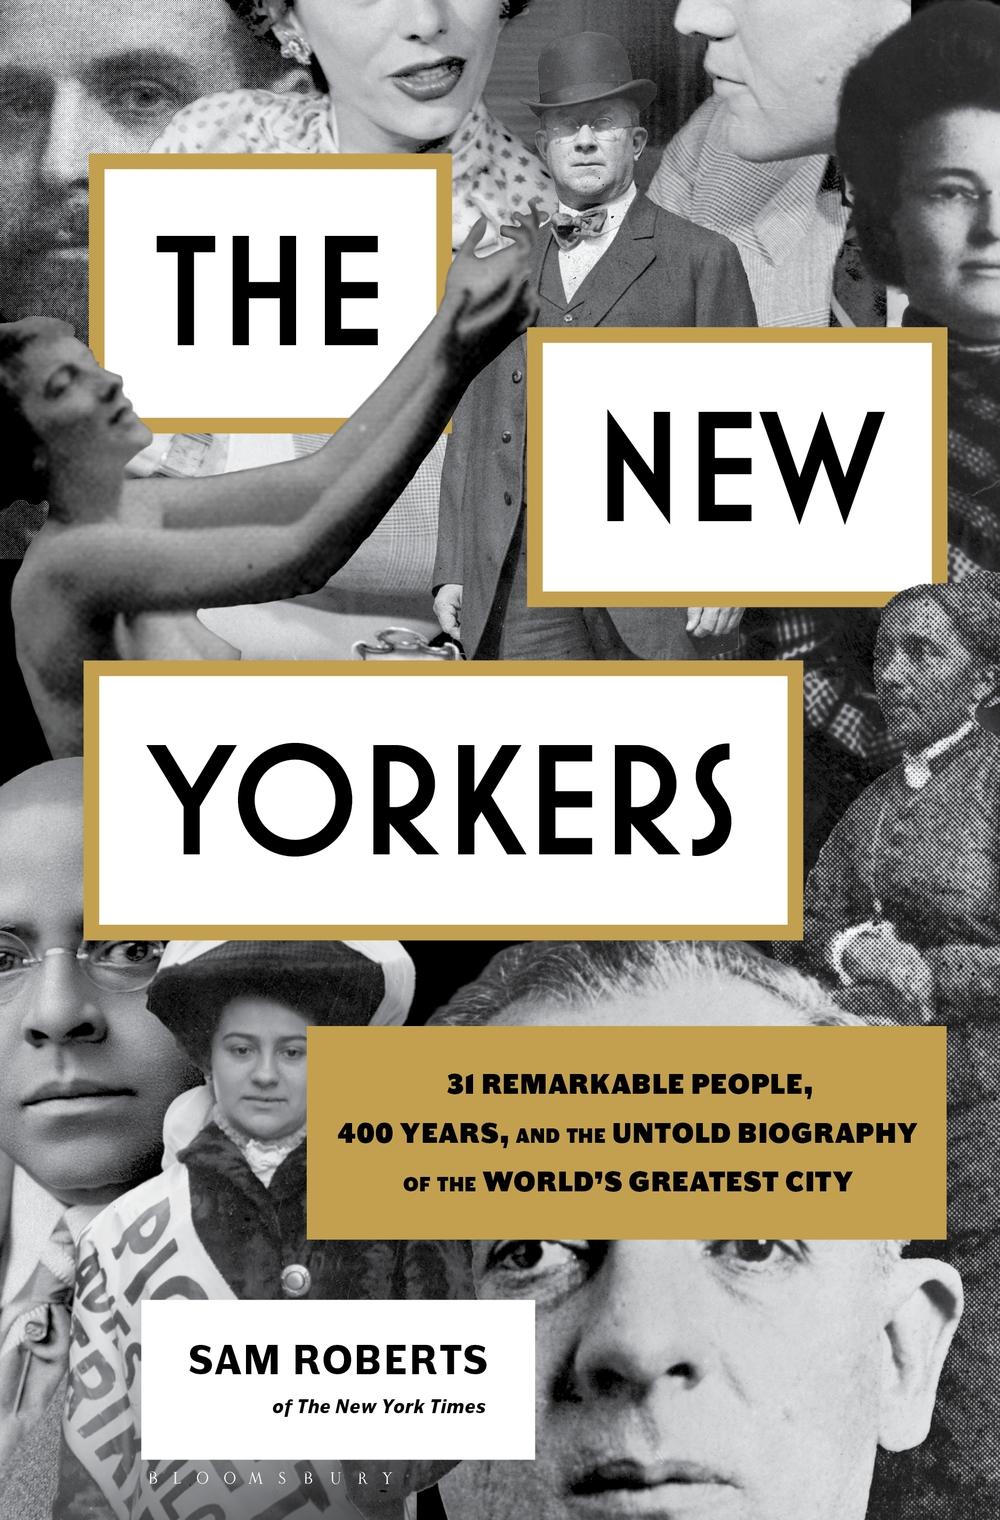 "The New Yorkers" book cover by Sam Roberts. Collage of different important New York figures in black and white